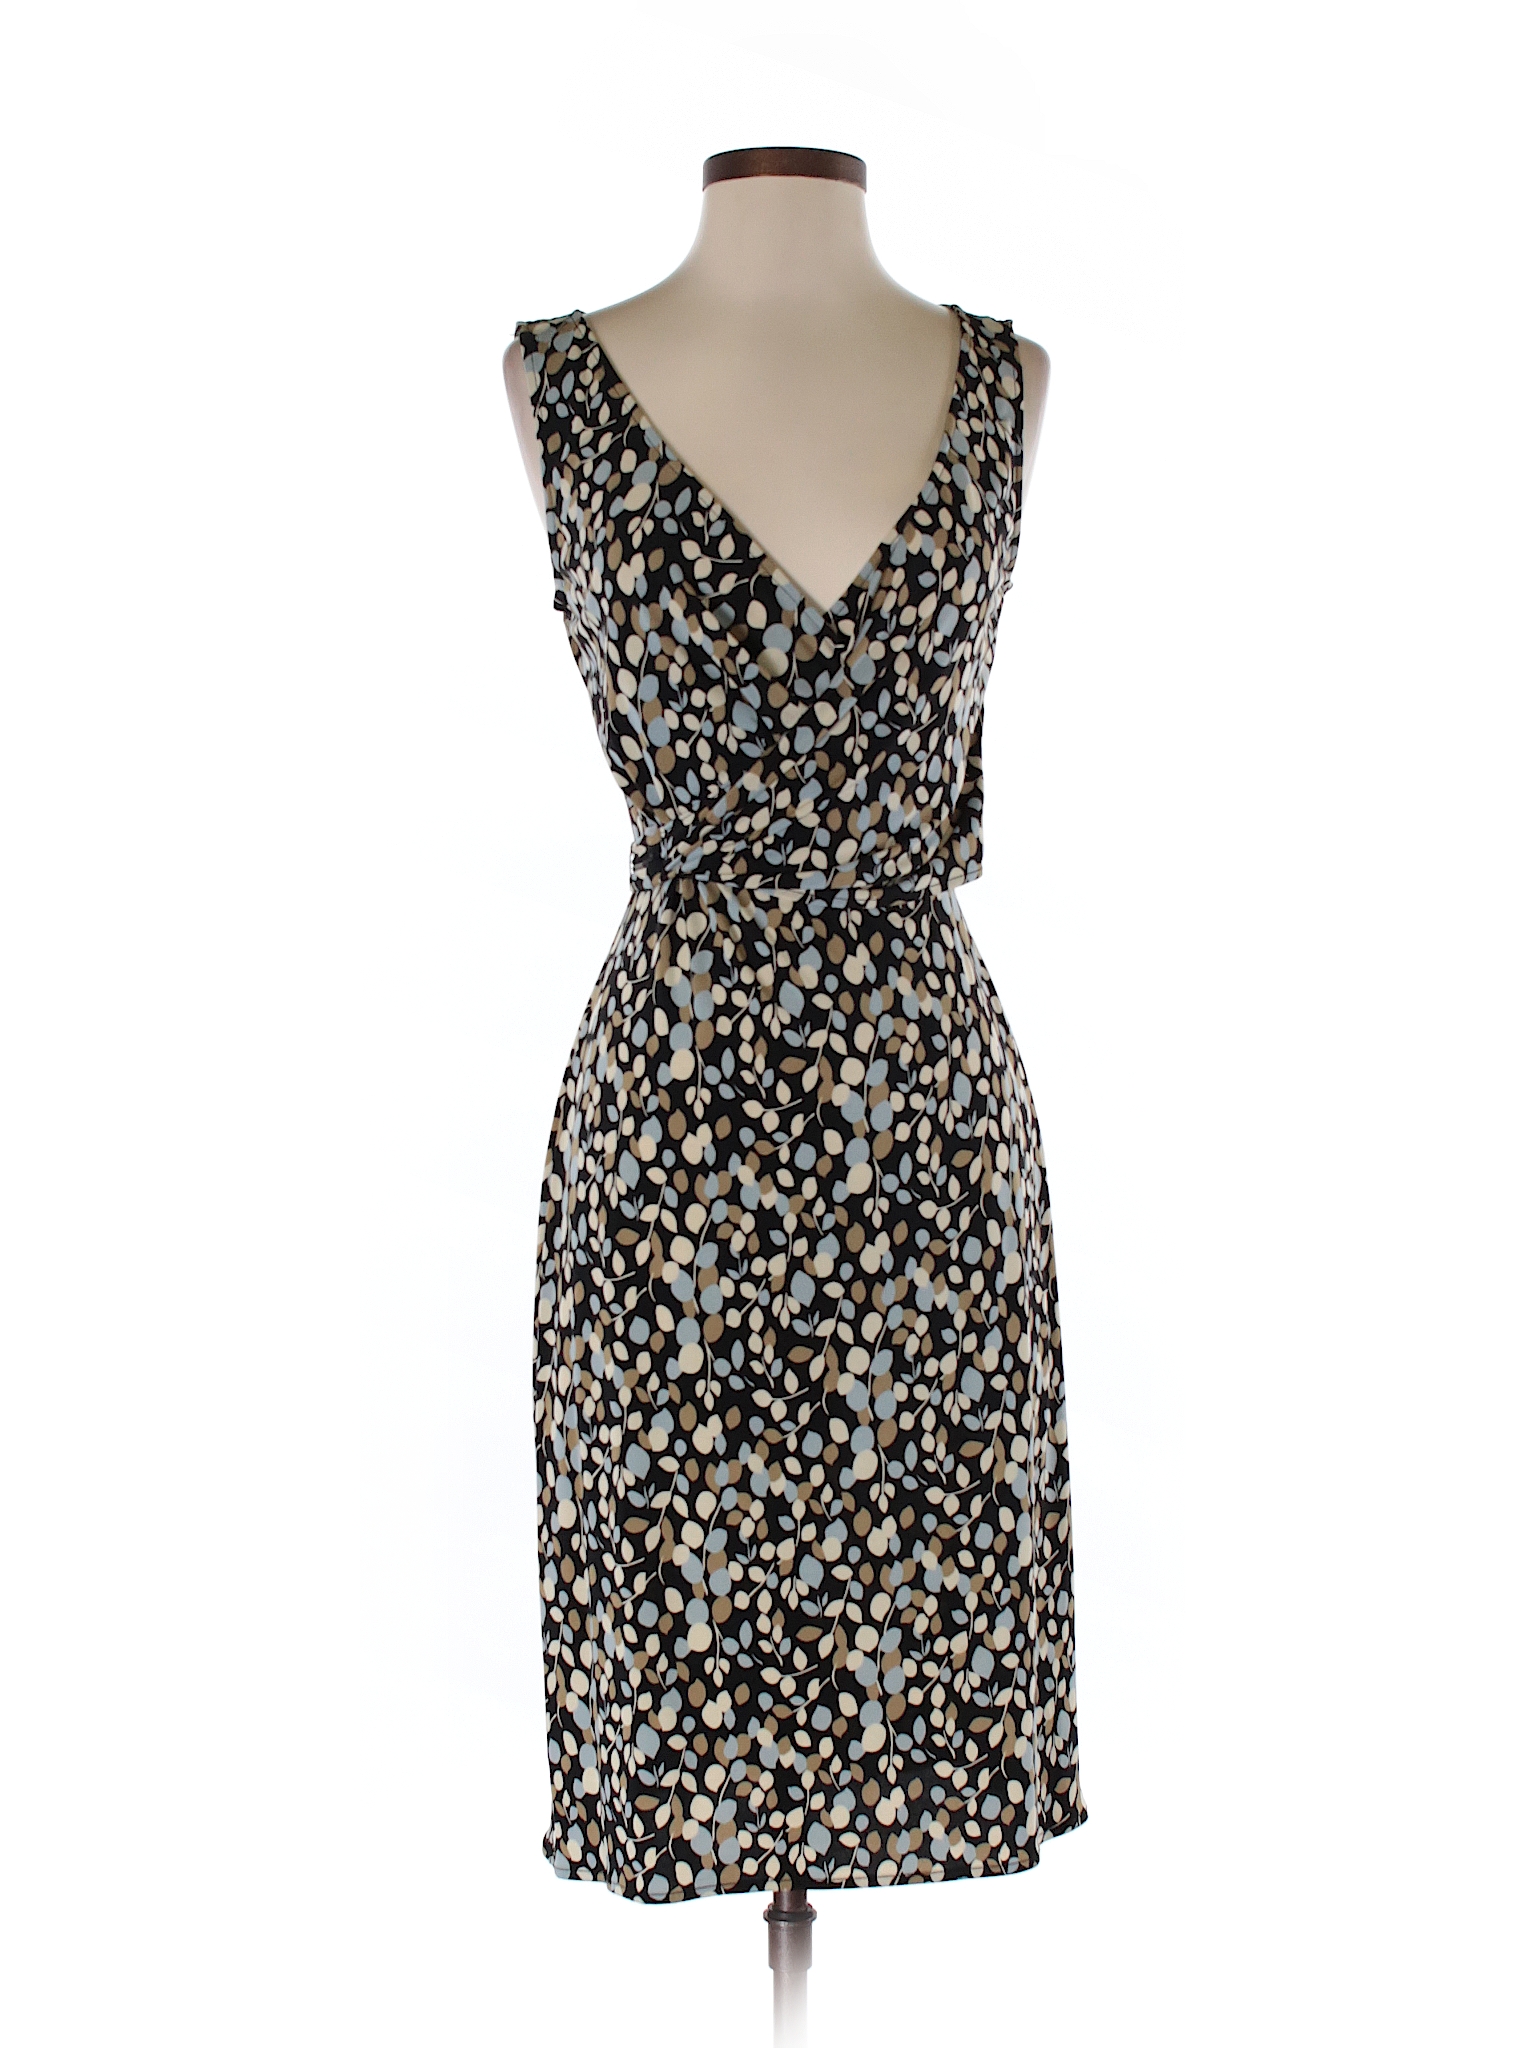 Bcbgmaxazria Casual Dress - 88% off only on thredUP